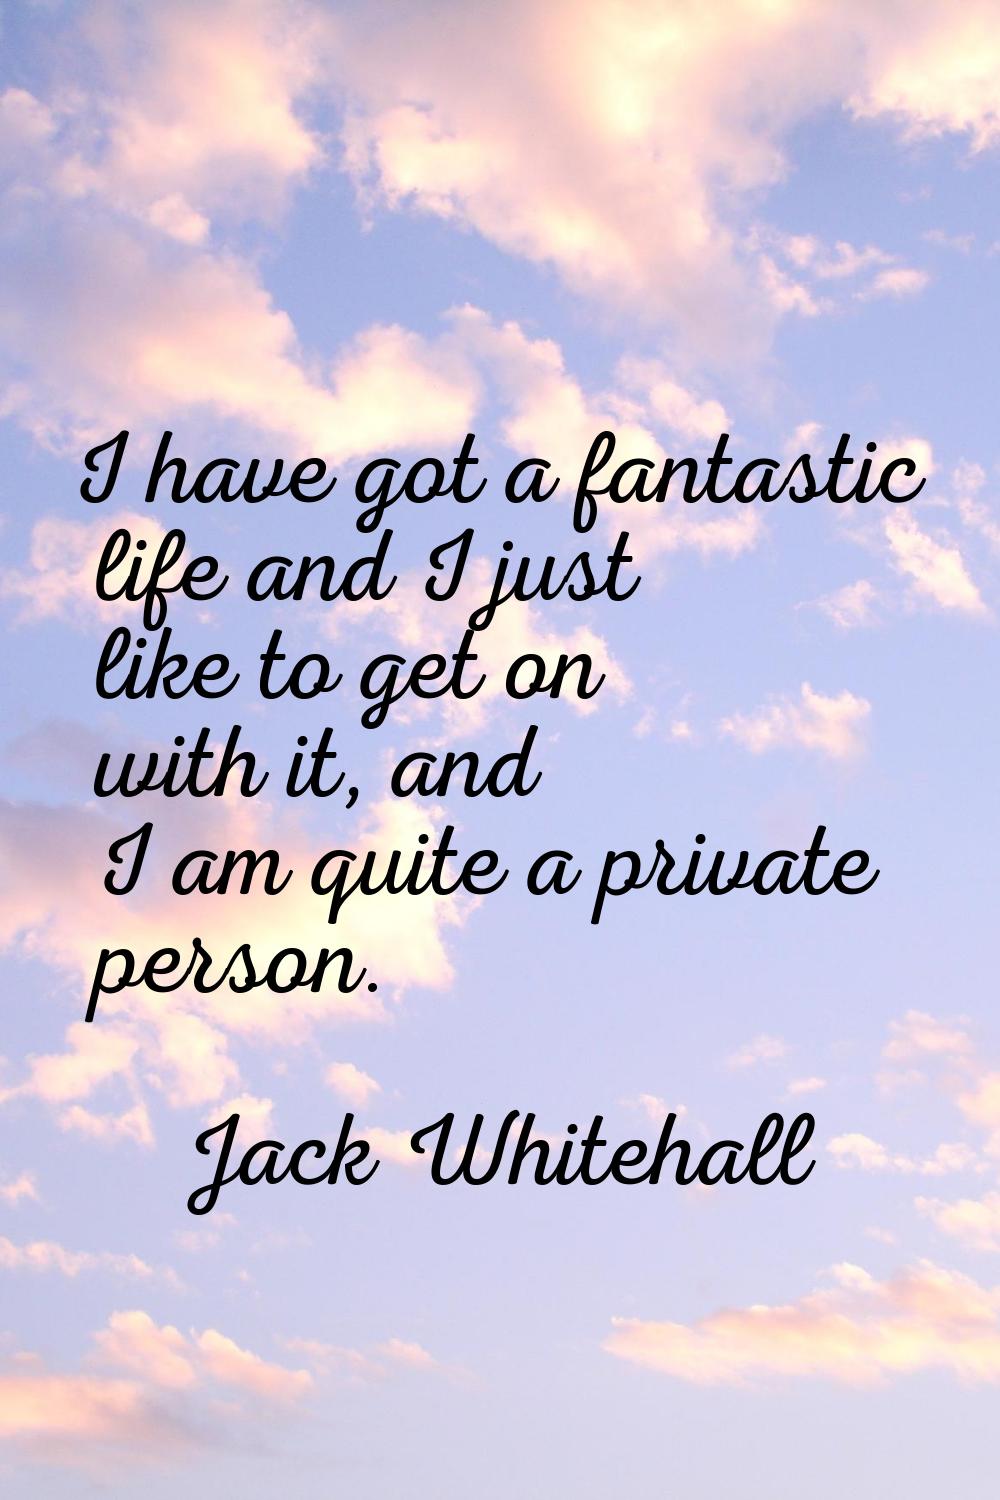 I have got a fantastic life and I just like to get on with it, and I am quite a private person.